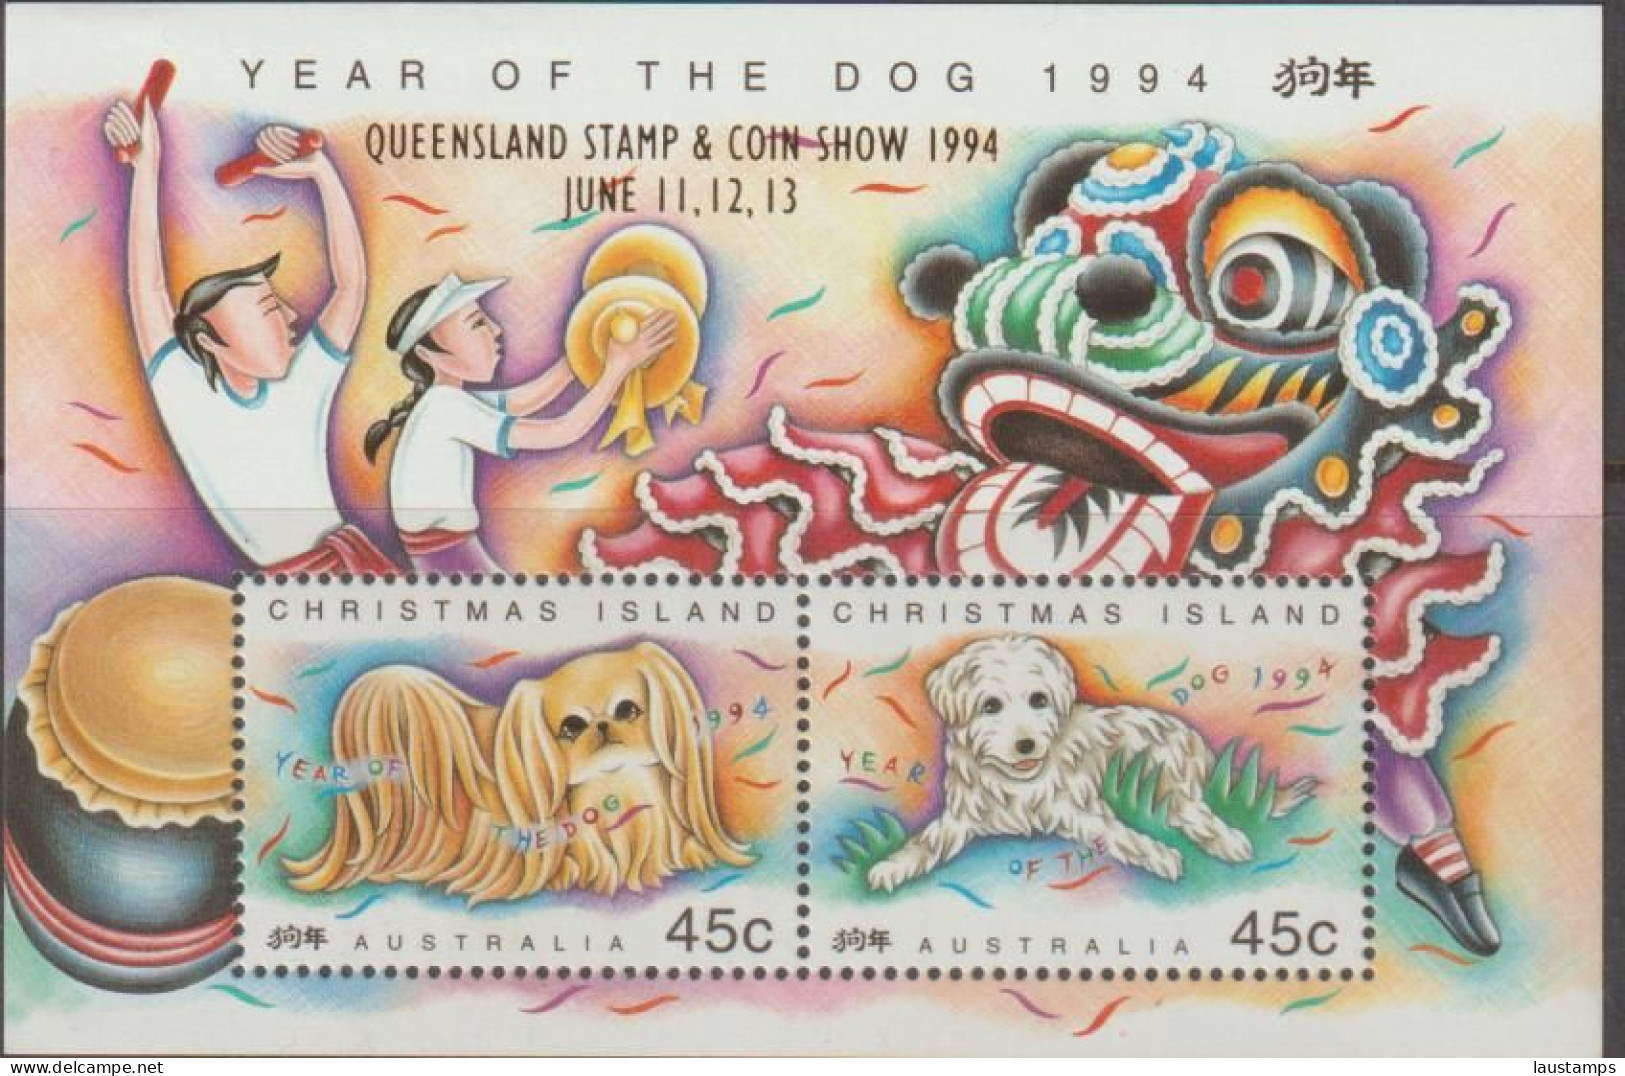 Christmas Island 1994 Year Of The Dog Ovpt Queensland Stamp & Coin Show S/S MNH - Nouvel An Chinois